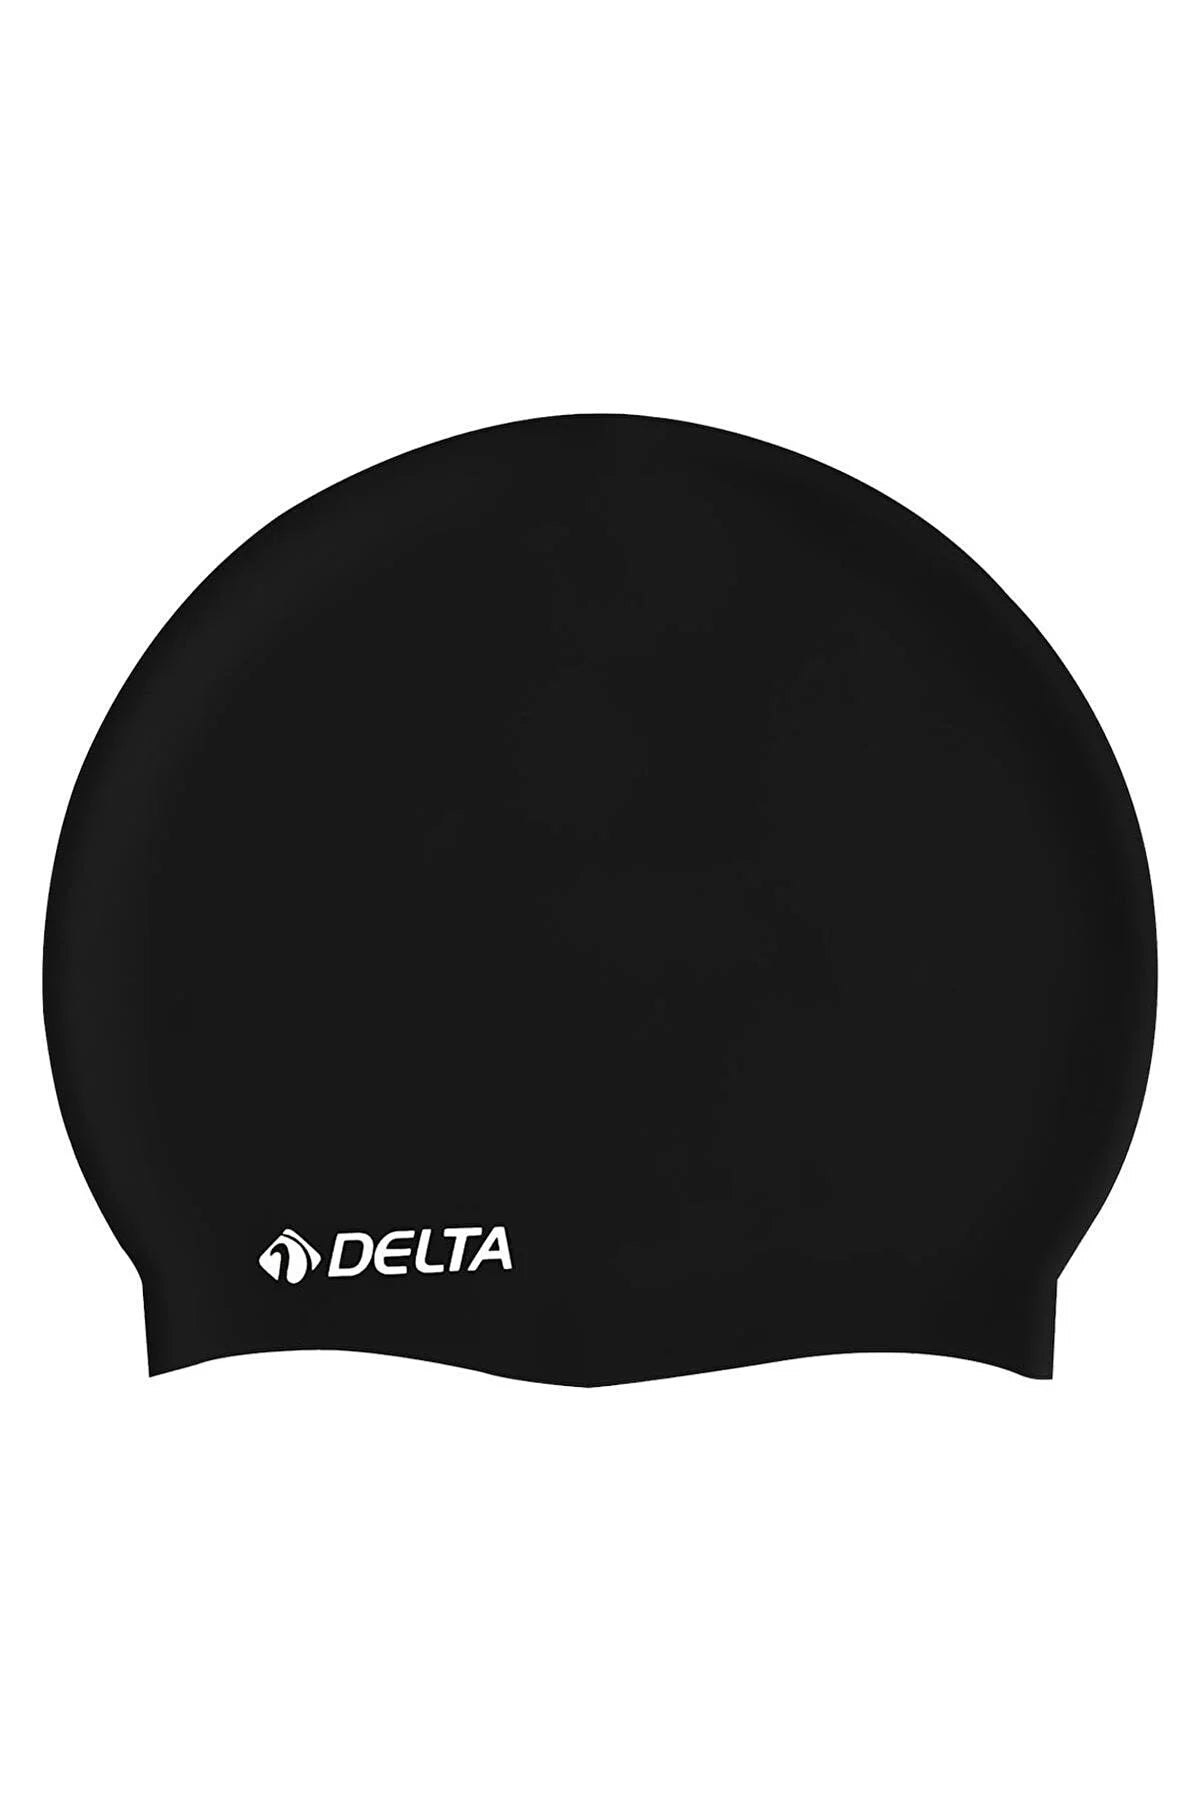 Silicone Bone Deluxe Swim Cap - Solid Black for Pool and Sea | Ideal for Braids, Dreadlocks, and Long Hair | Includes Free Ear Plugs and PVC Storage Bag